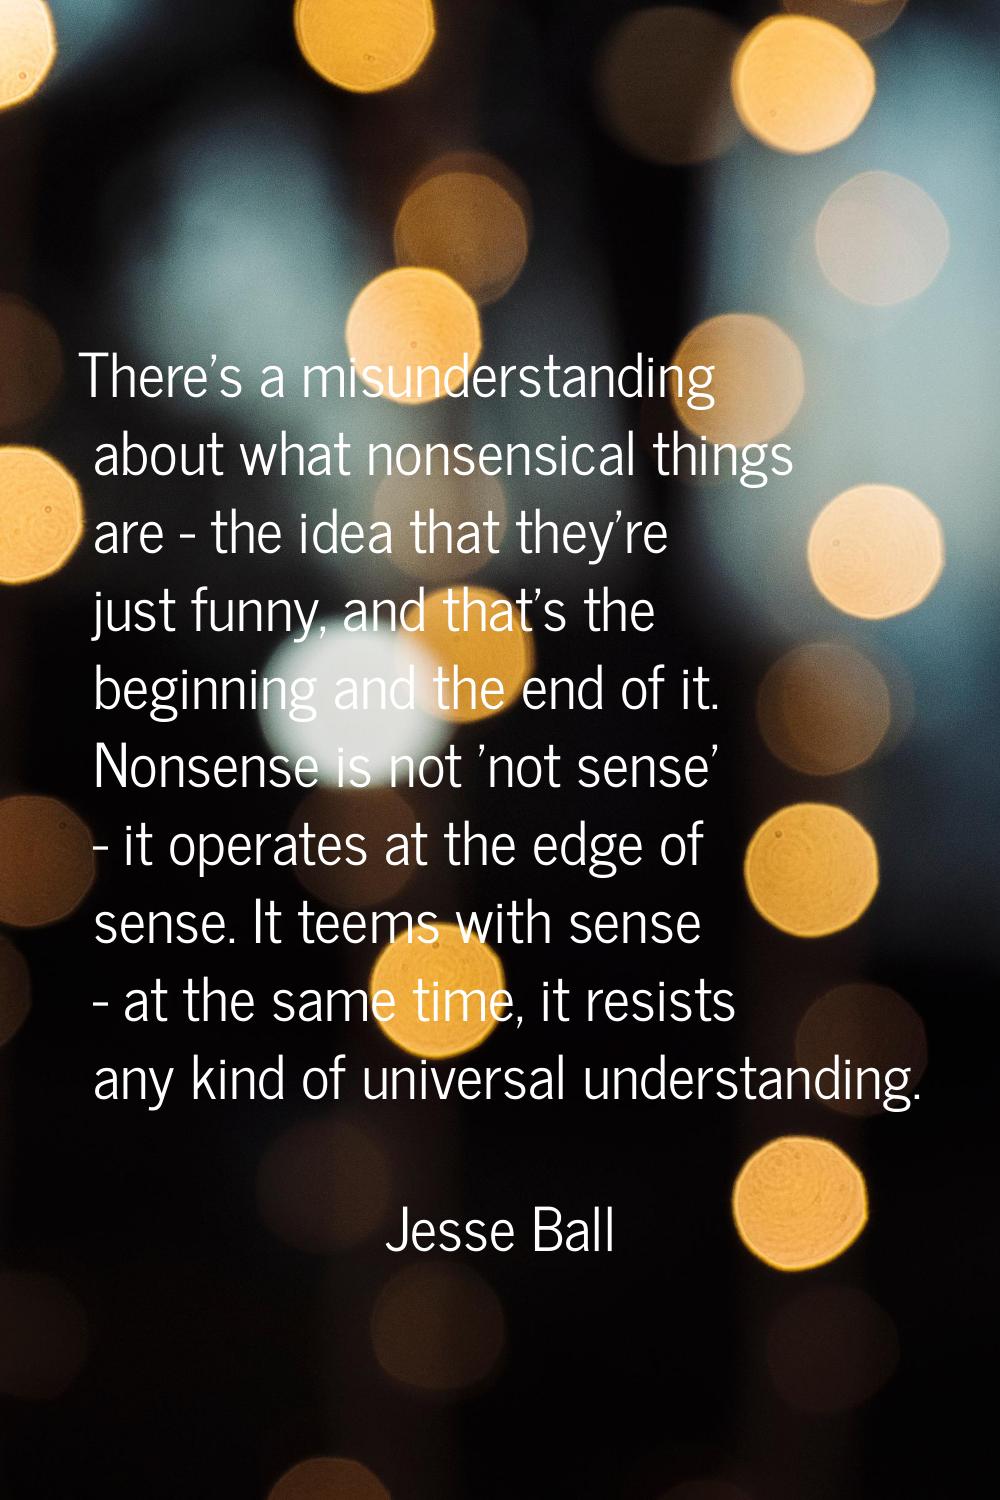 There's a misunderstanding about what nonsensical things are - the idea that they're just funny, an